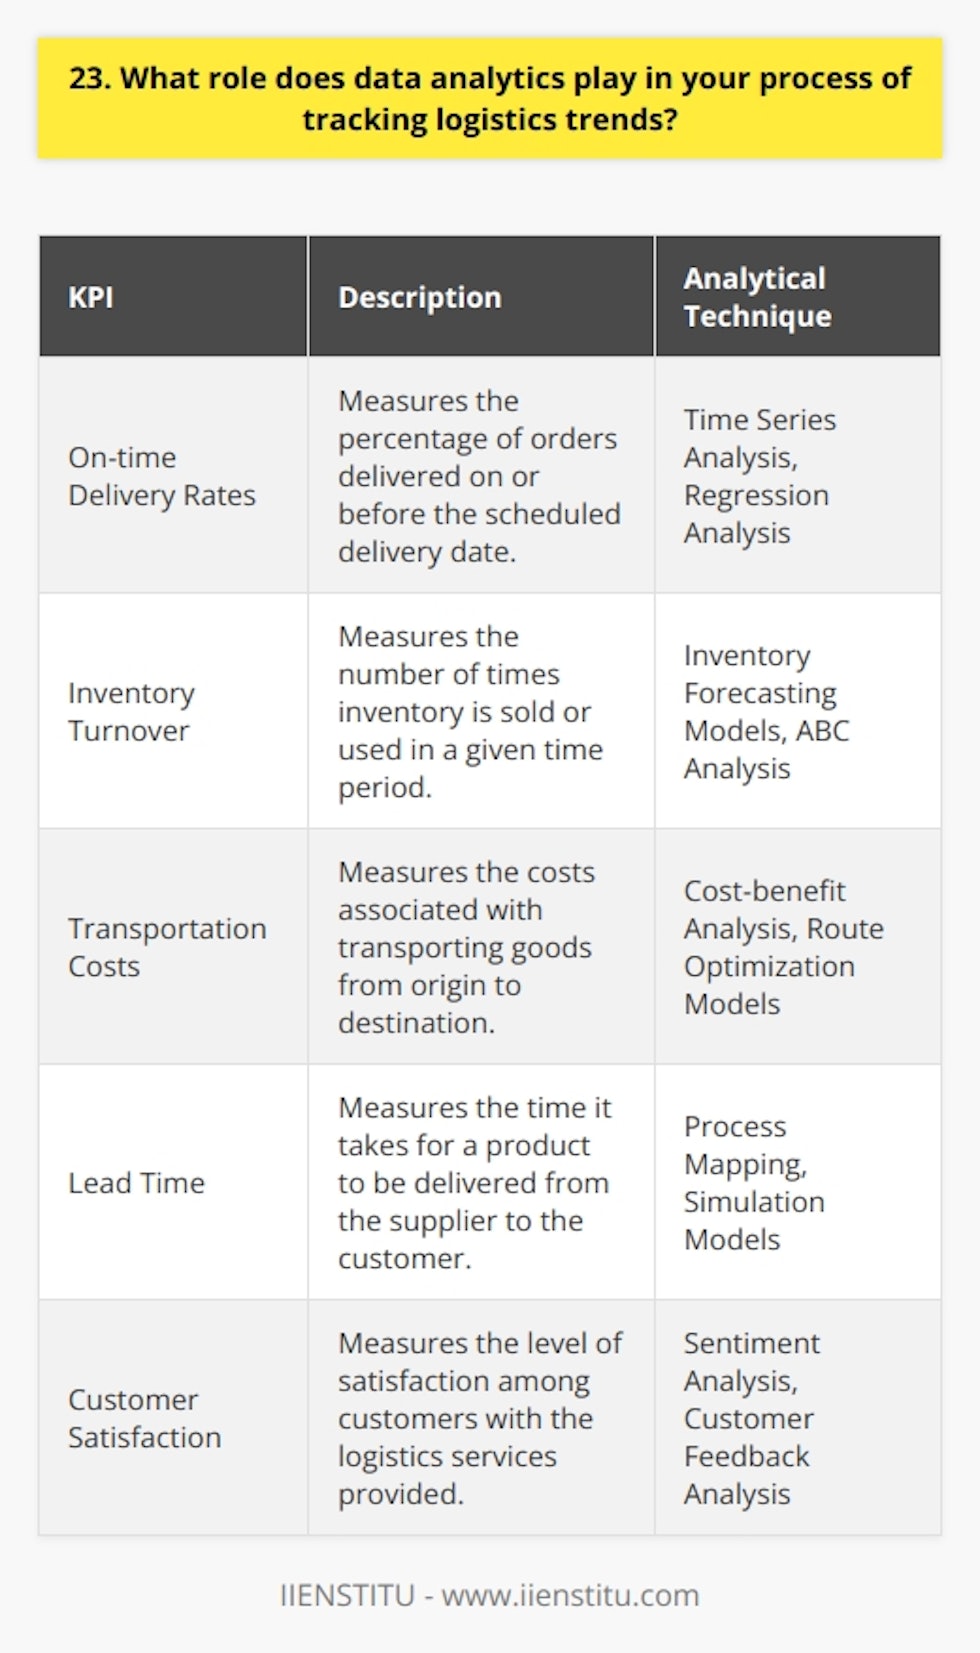 Data analytics plays a crucial role in my process of tracking logistics trends. By analyzing historical data, I can identify patterns and forecast future demand, allowing me to optimize inventory levels and reduce costs. Identifying Key Performance Indicators I start by identifying the key performance indicators (KPIs) that are most relevant to our logistics operations. These might include on-time delivery rates, inventory turnover, and transportation costs. By focusing on these metrics, I can quickly spot areas for improvement. Collecting and Cleaning Data Next, I collect data from various sources, such as our warehouse management system and transportation providers. Its important to ensure the data is clean and accurate before beginning any analysis. I often use Excel or SQL to manipulate and clean the data. Analyzing Trends and Patterns Once the data is ready, I use various analytical techniques to identify trends and patterns. For example, I might use regression analysis to determine the relationship between order volume and delivery times. Or I might use time series analysis to forecast future demand based on historical sales data. One time, I noticed that our on-time delivery rates were consistently lower for orders shipped to a particular region. By digging deeper into the data, I discovered that our transportation provider for that region was experiencing frequent delays. Armed with this insight, we were able to switch to a more reliable provider and improve our delivery performance. Communicating Insights and Recommendations Finally, I communicate my findings and recommendations to stakeholders across the organization. I believe in using clear, concise language and visualizations to make complex data easy to understand. By collaborating with colleagues in operations, sales, and finance, we can turn data-driven insights into actionable strategies that drive business results. In my experience, data analytics is a powerful tool for tracking logistics trends and identifying opportunities for improvement. By leveraging data to make informed decisions, we can optimize our supply chain, reduce costs, and ultimately deliver better service to our customers.